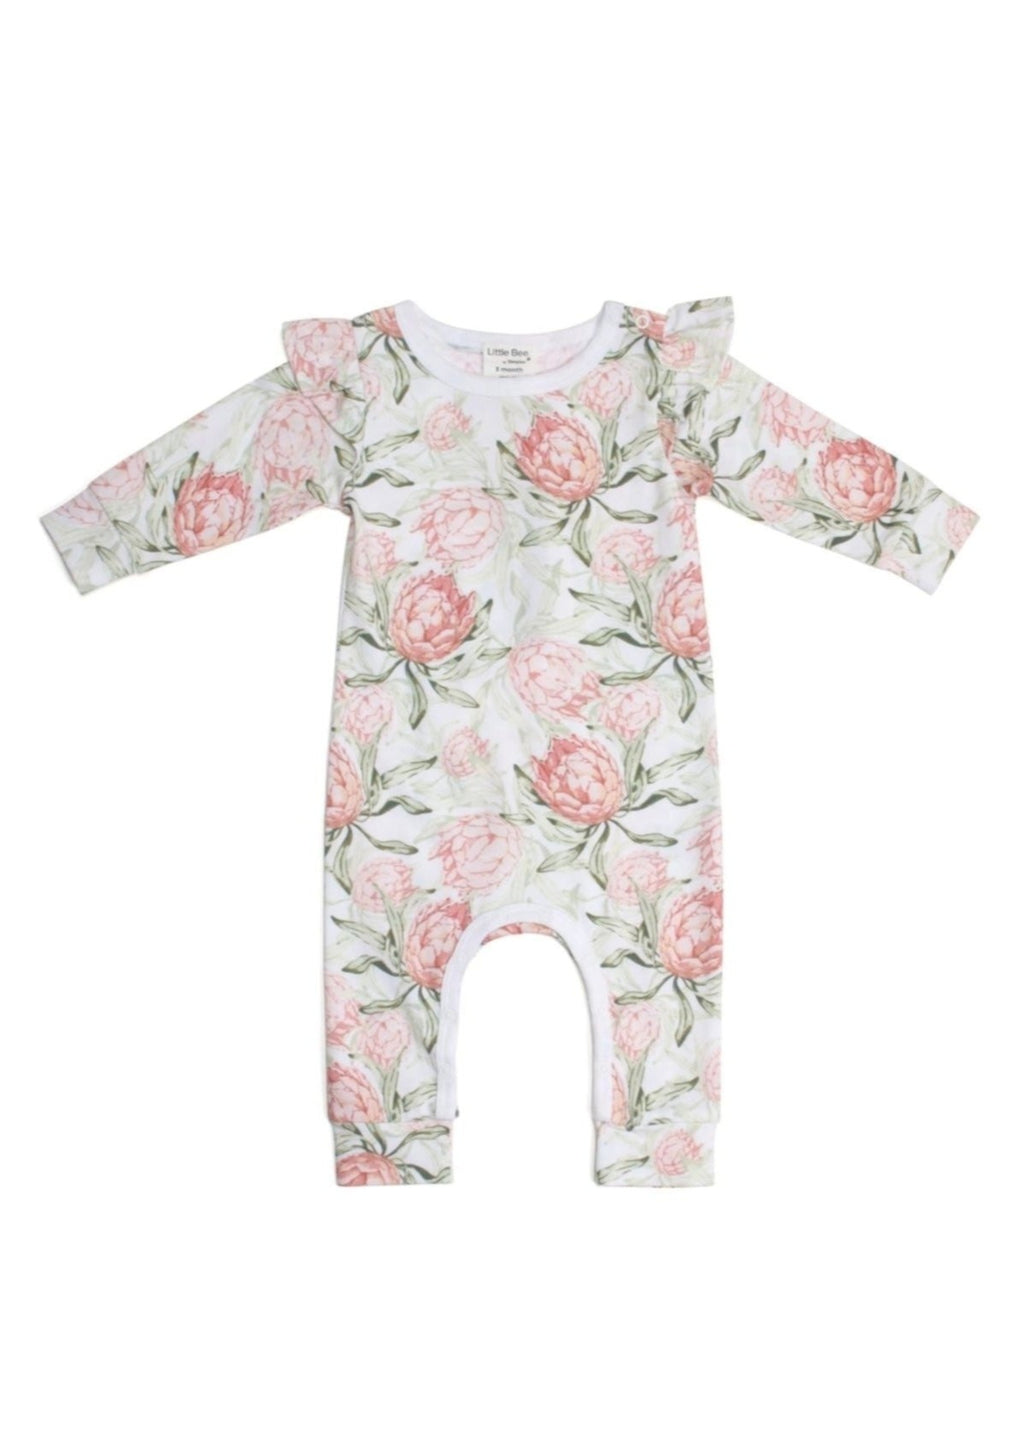 Cotton Frill Babygrow - Botanical, by Little Bee Watch a child explore a world of wonder that’s evergreen - fresh and new, yet everlasting. Your little gardener can offer a lesson to us all in the magic of time spent in nature to inspire, delight and bring joy.  Little Bee by Dimples Evergreen 2023 Summer Collection is made using Oeko-Tex Certified Organic Cotton. Combining a Protea print with a classic stripe, you’ll have endless options for dressing your little one.